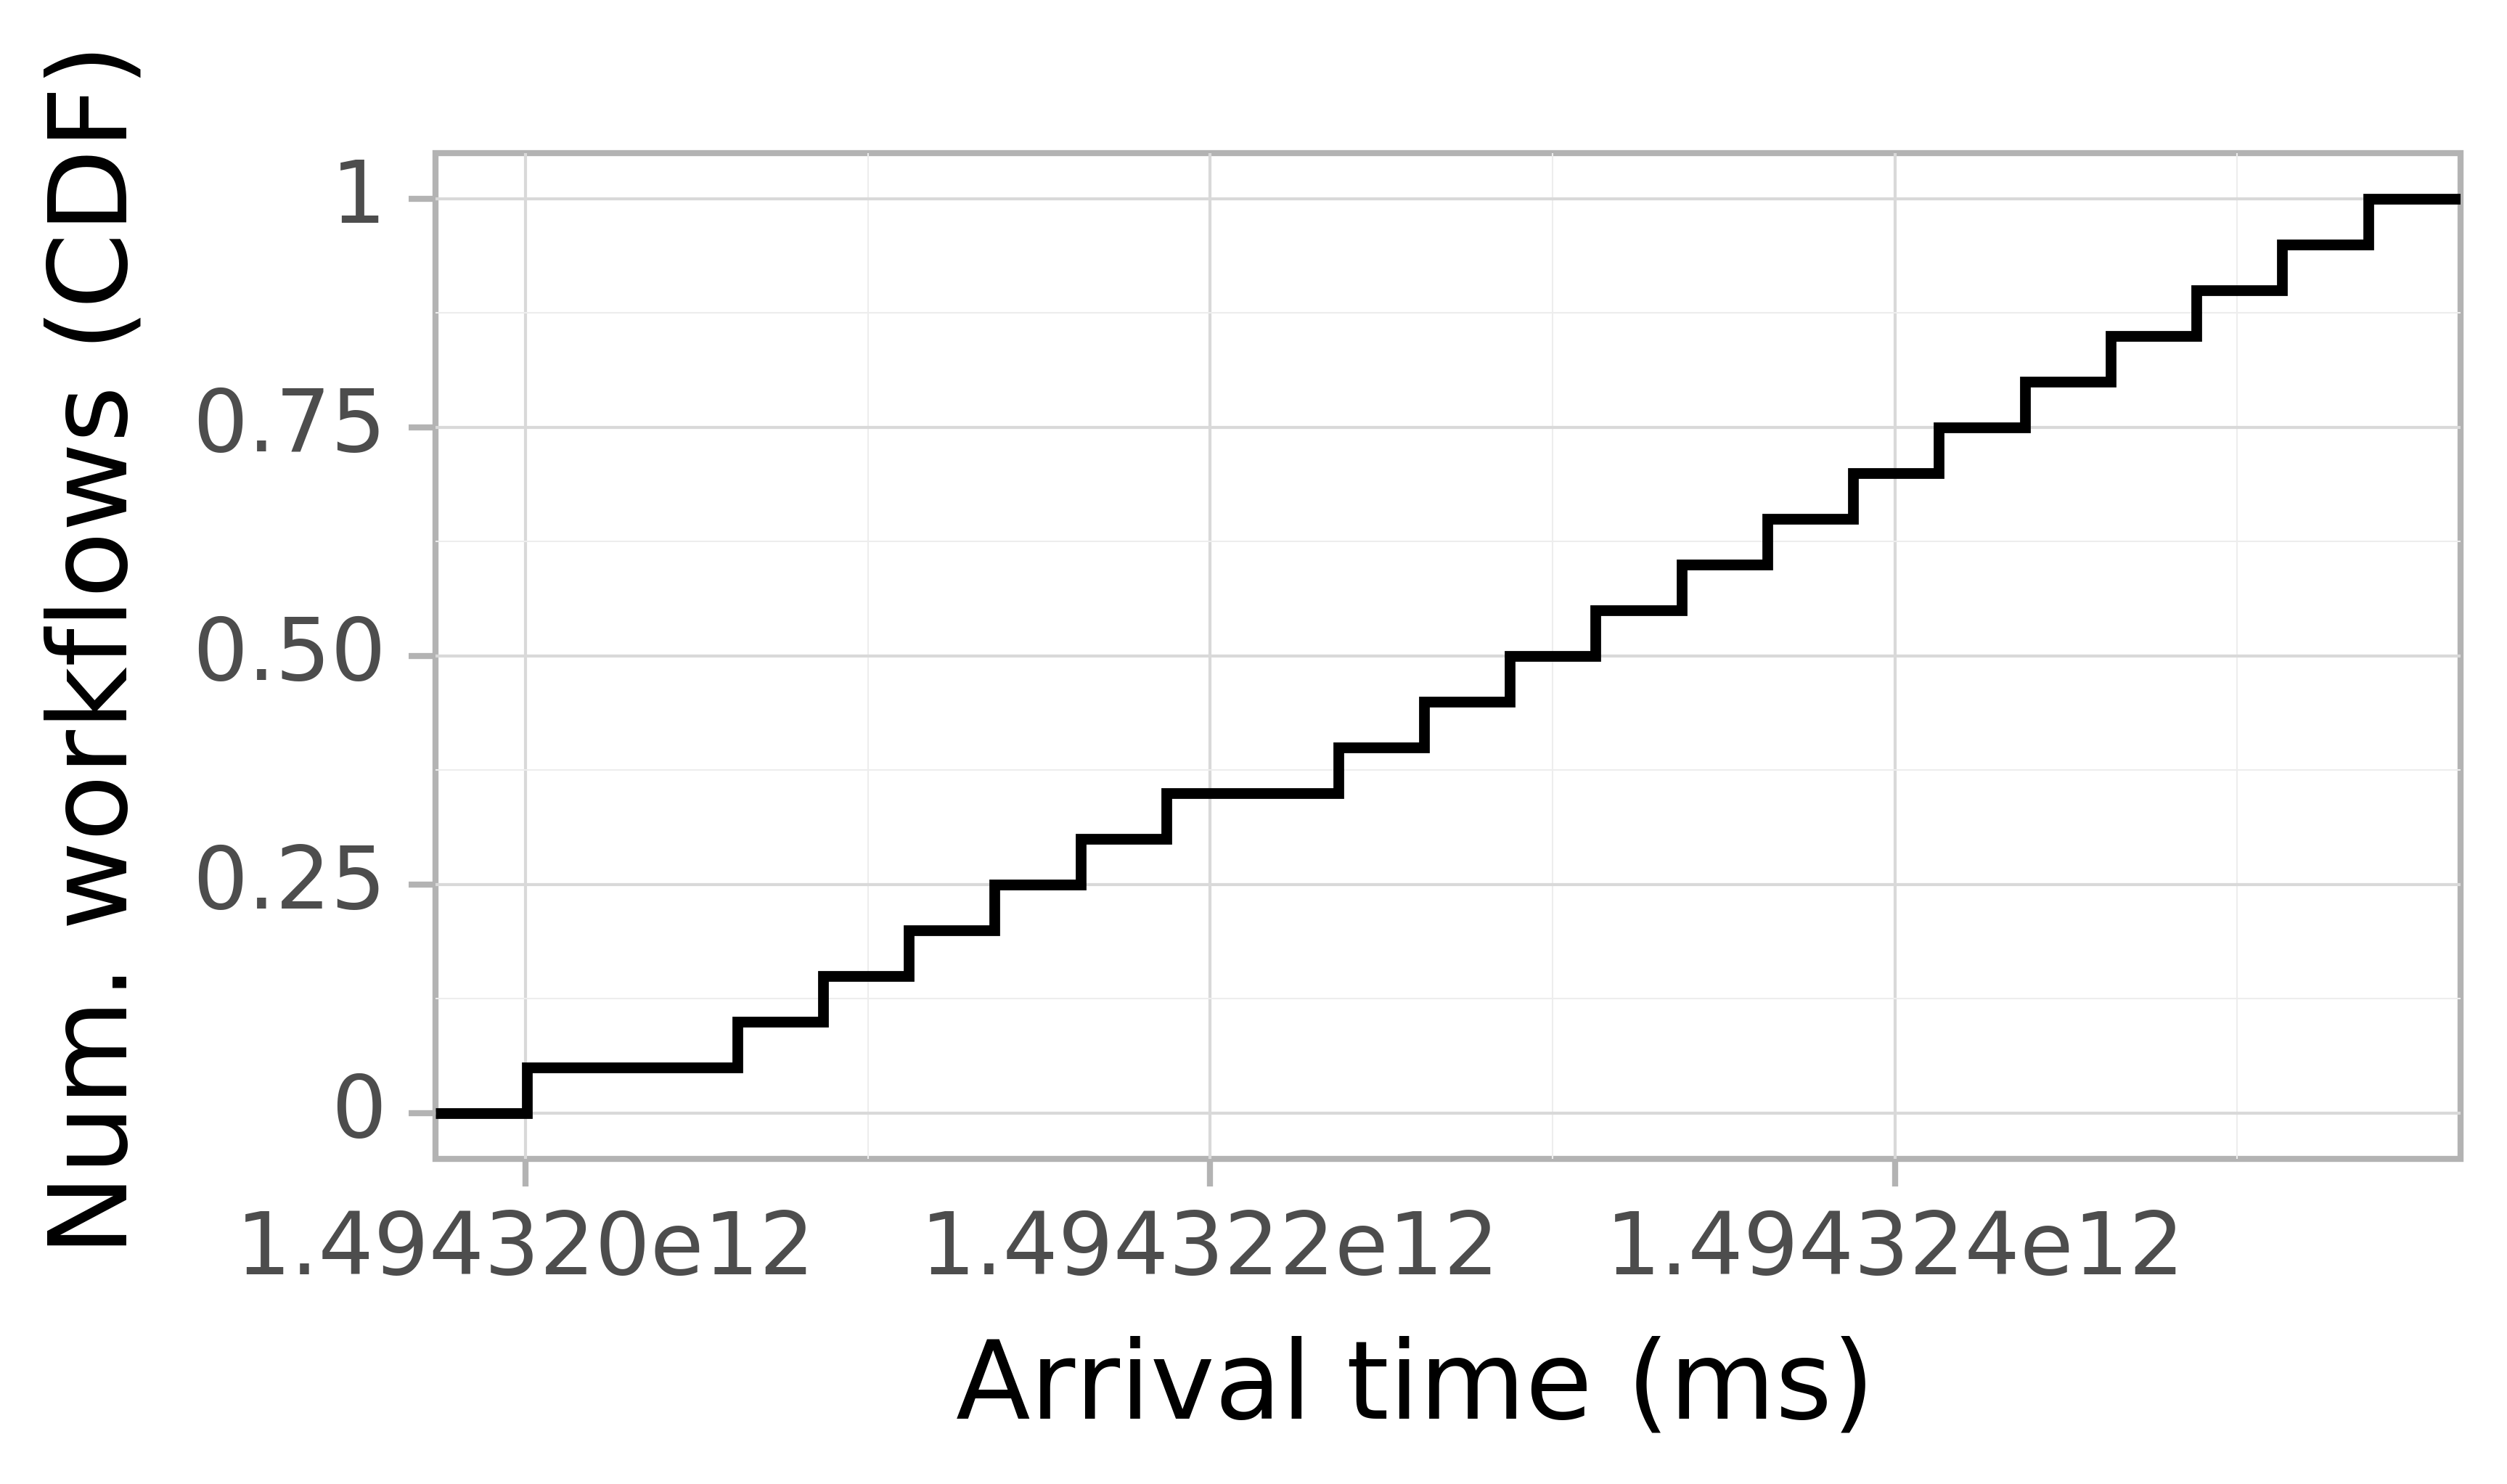 Job arrival CDF graph for the askalon-new_ee40 trace.